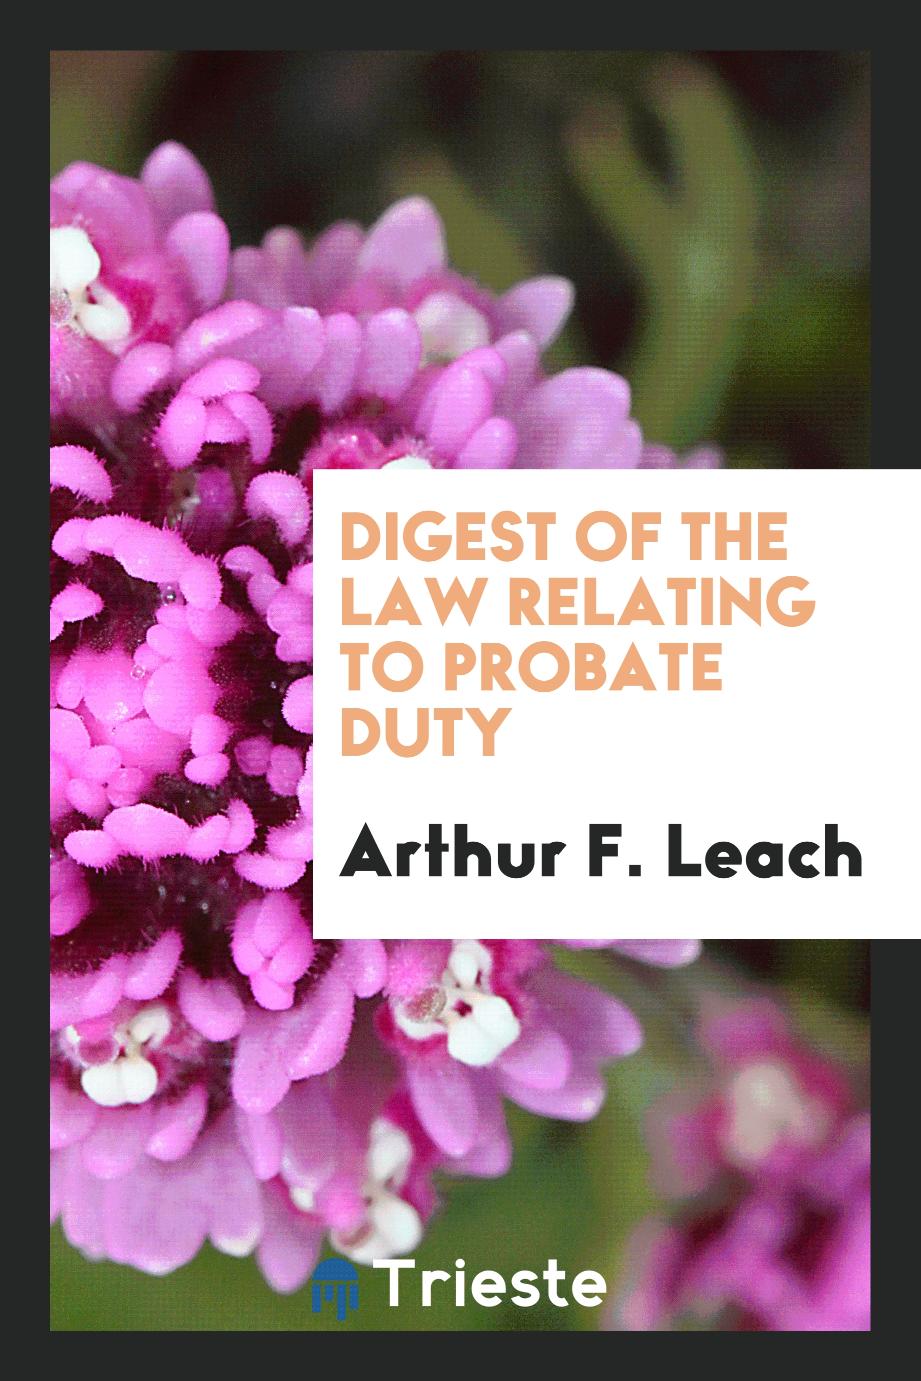 Digest of the Law Relating to Probate Duty